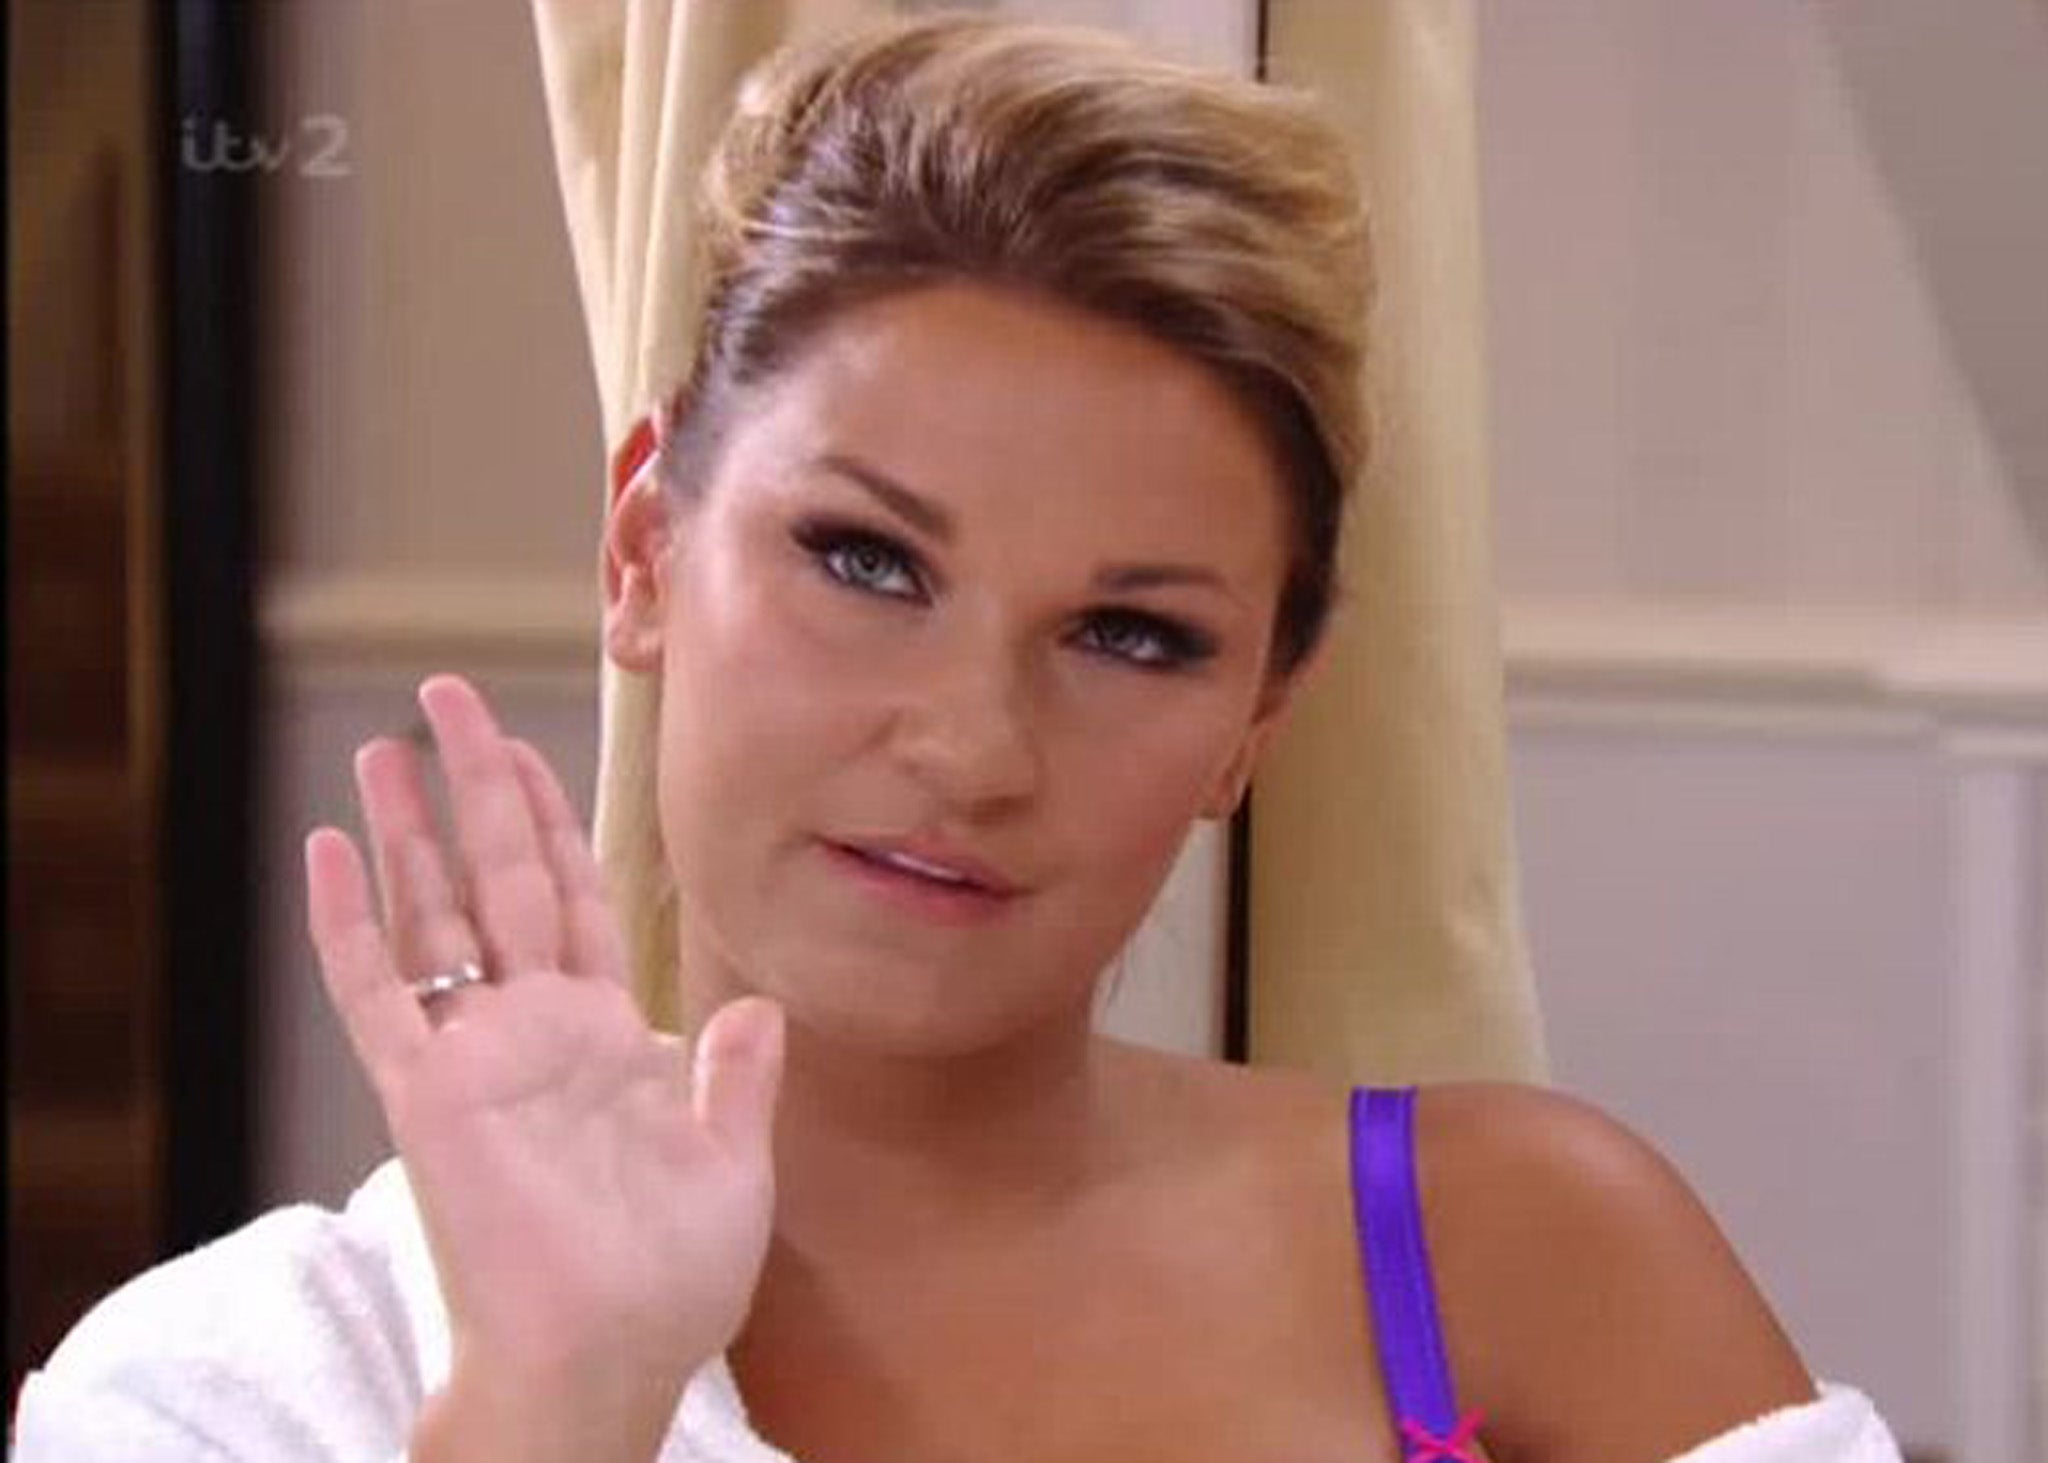 Sam Faiers will not be joining the I'm A Celebrity jungle after rumours suggested she would be